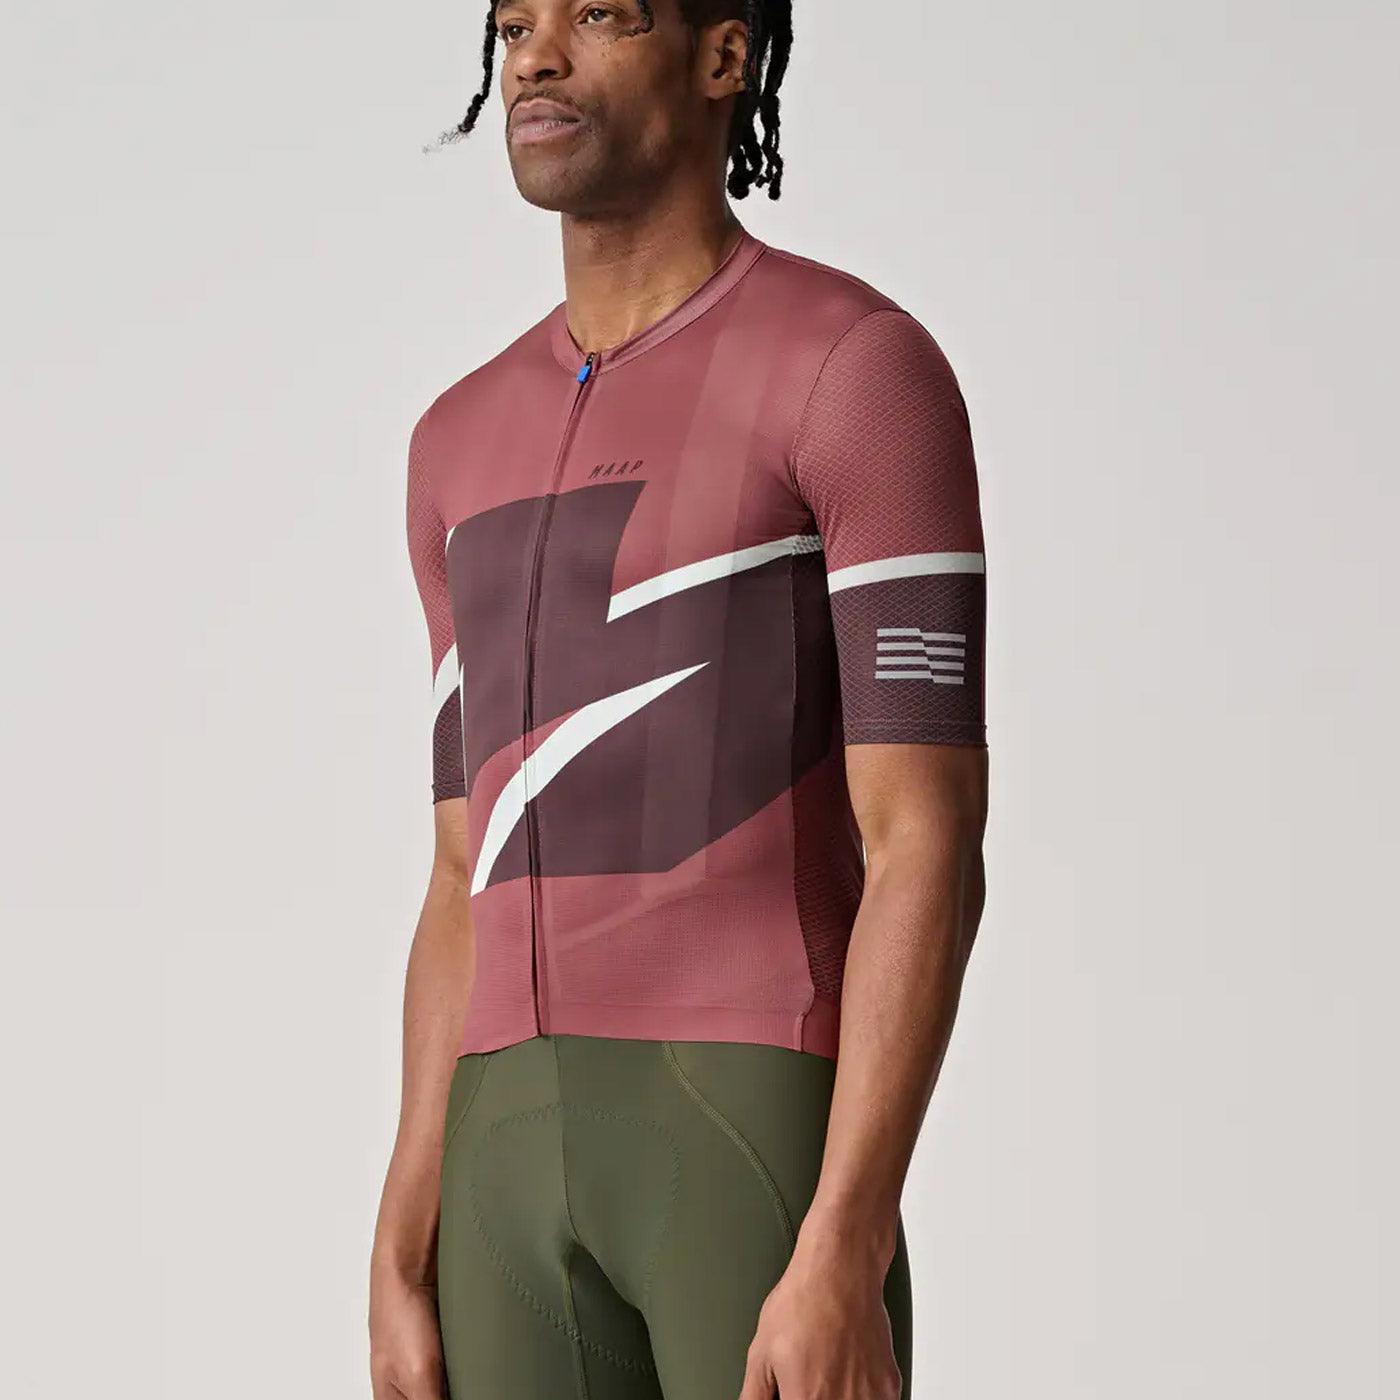 Maap Evolve 3D Pro Air 2.0 jersey - Brown | All4cycling